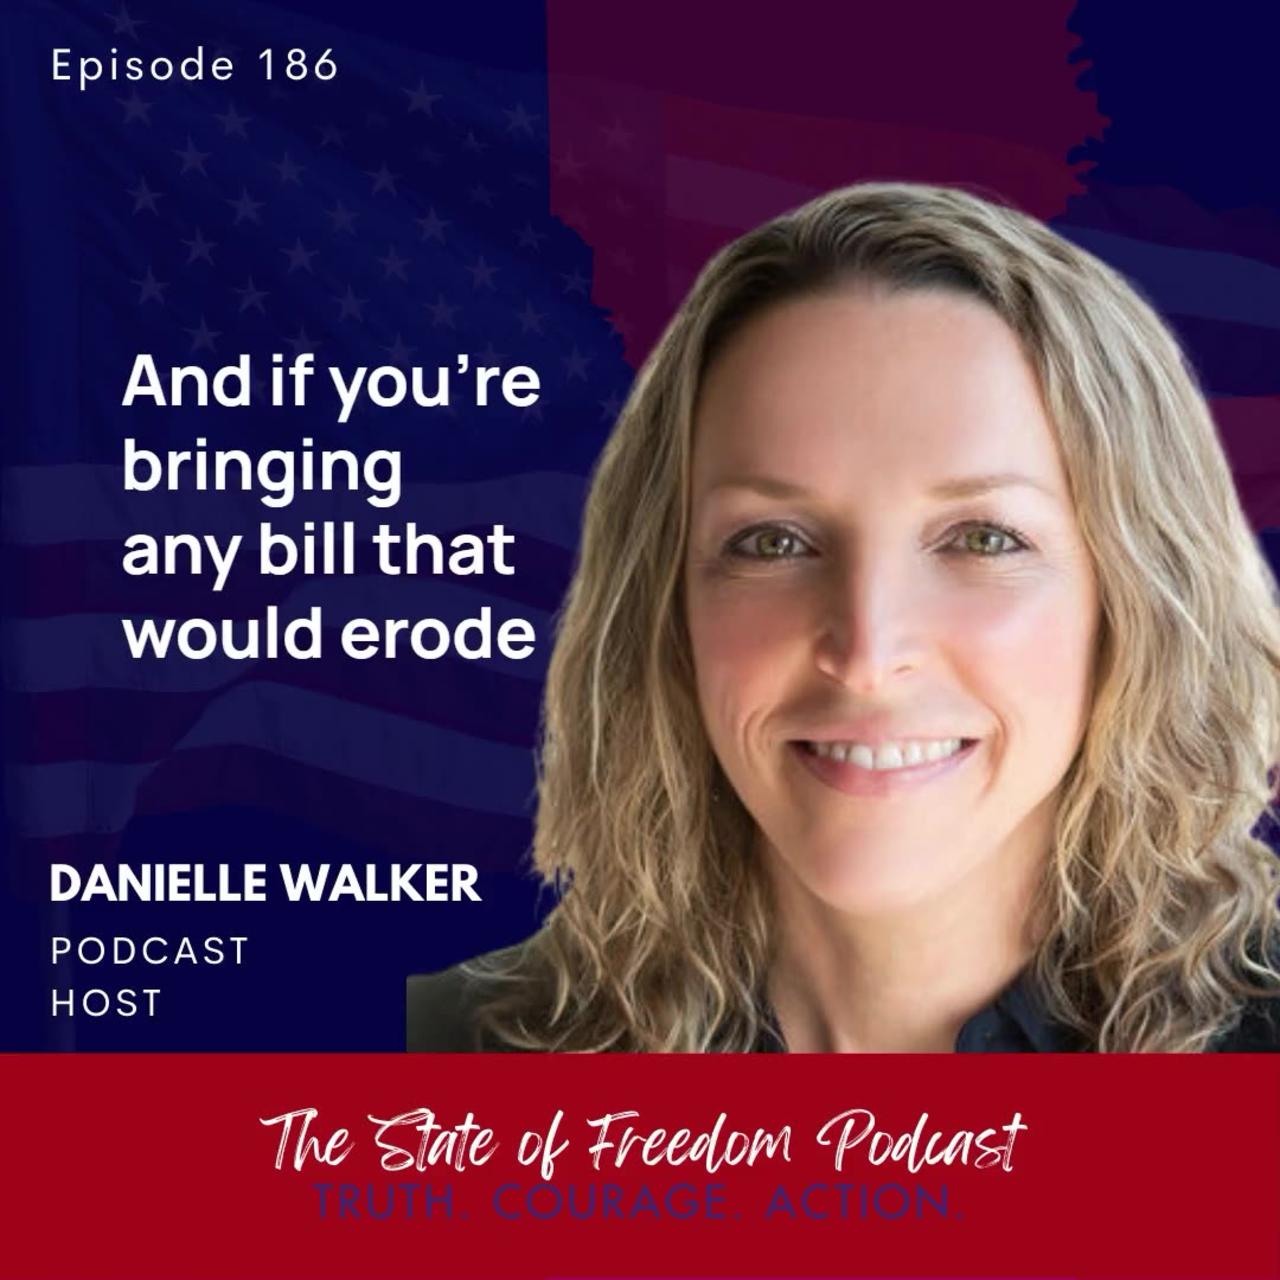 Danielle Walker Claps Back: Defend the Constitution or Step Aside!